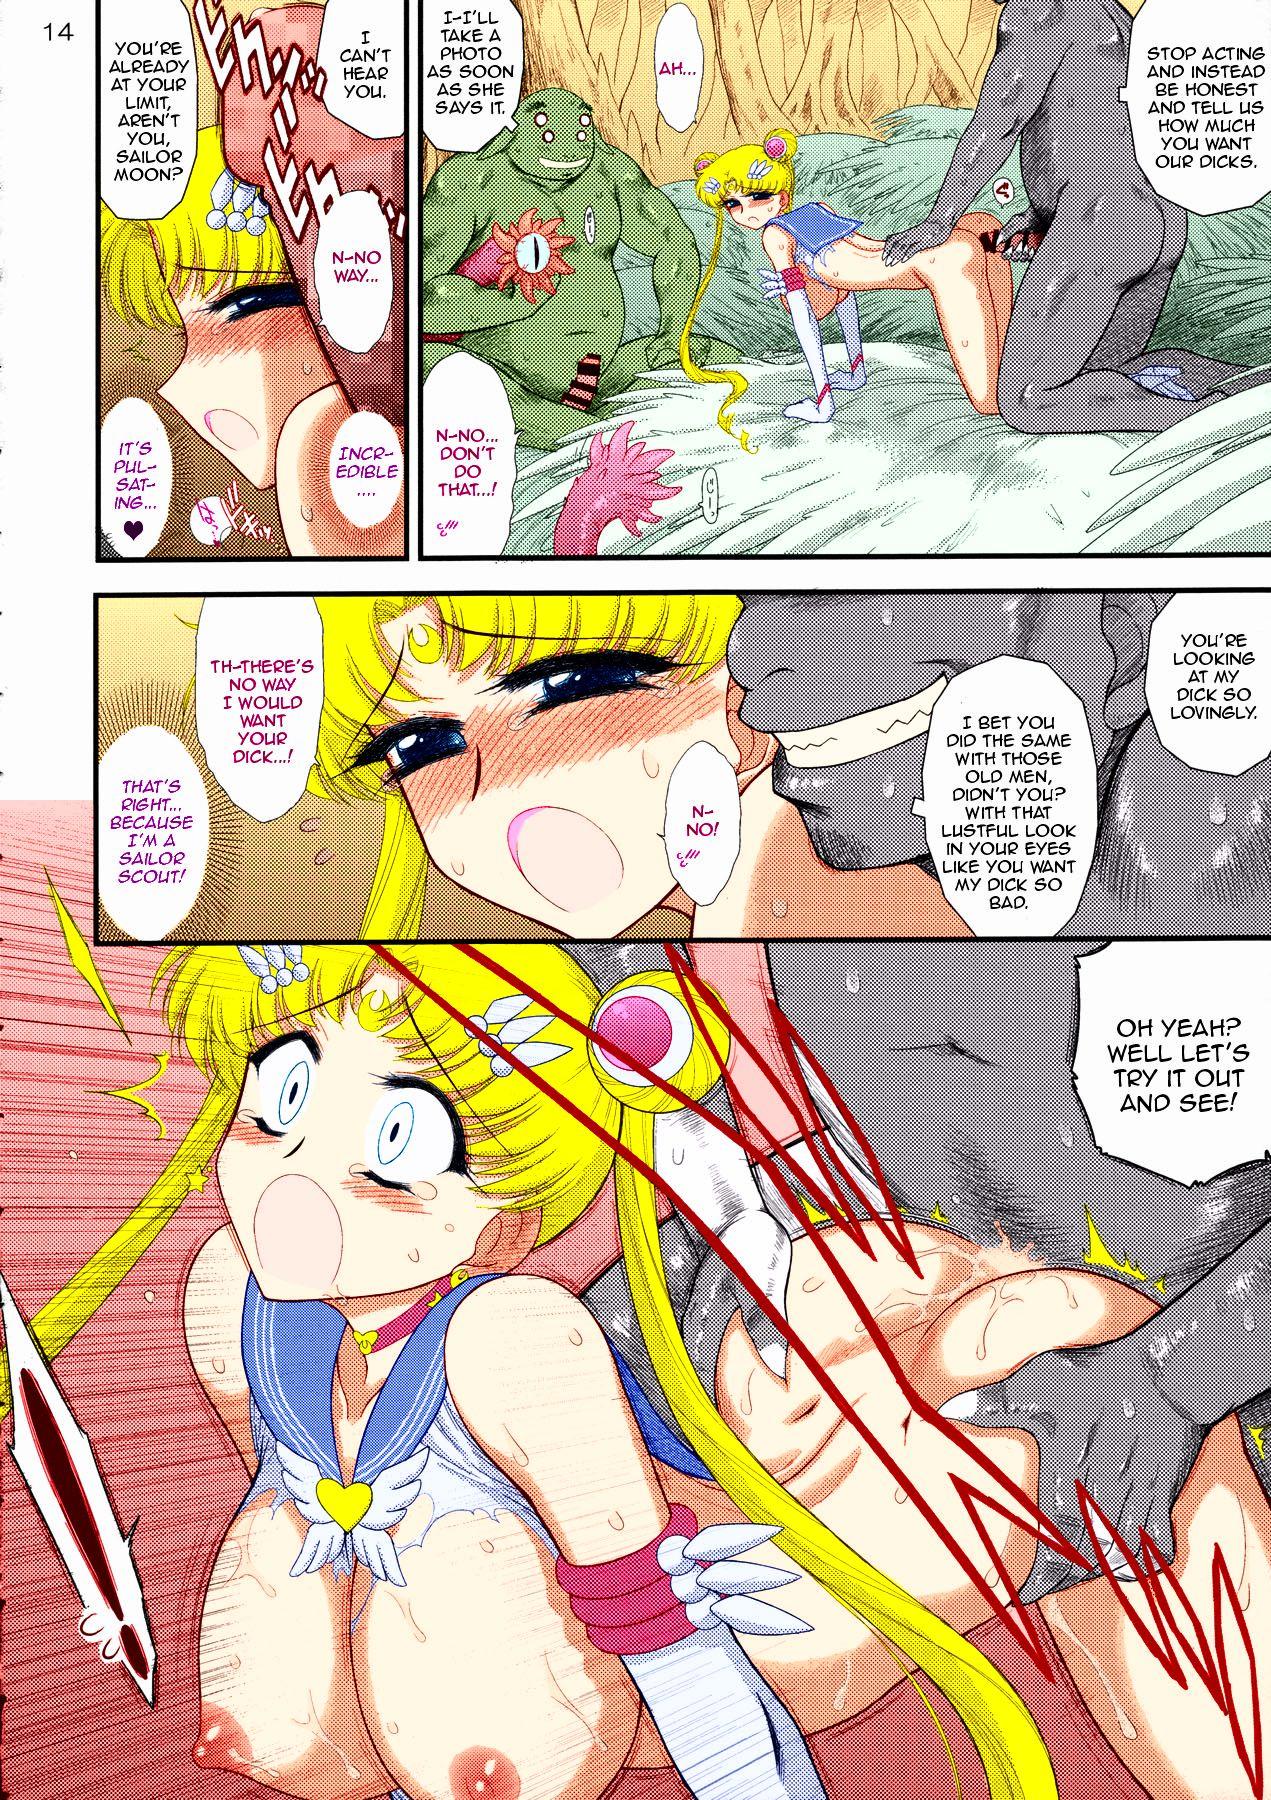 Hot Brunette Made in Heaven - Sailor moon Vecina - Page 13